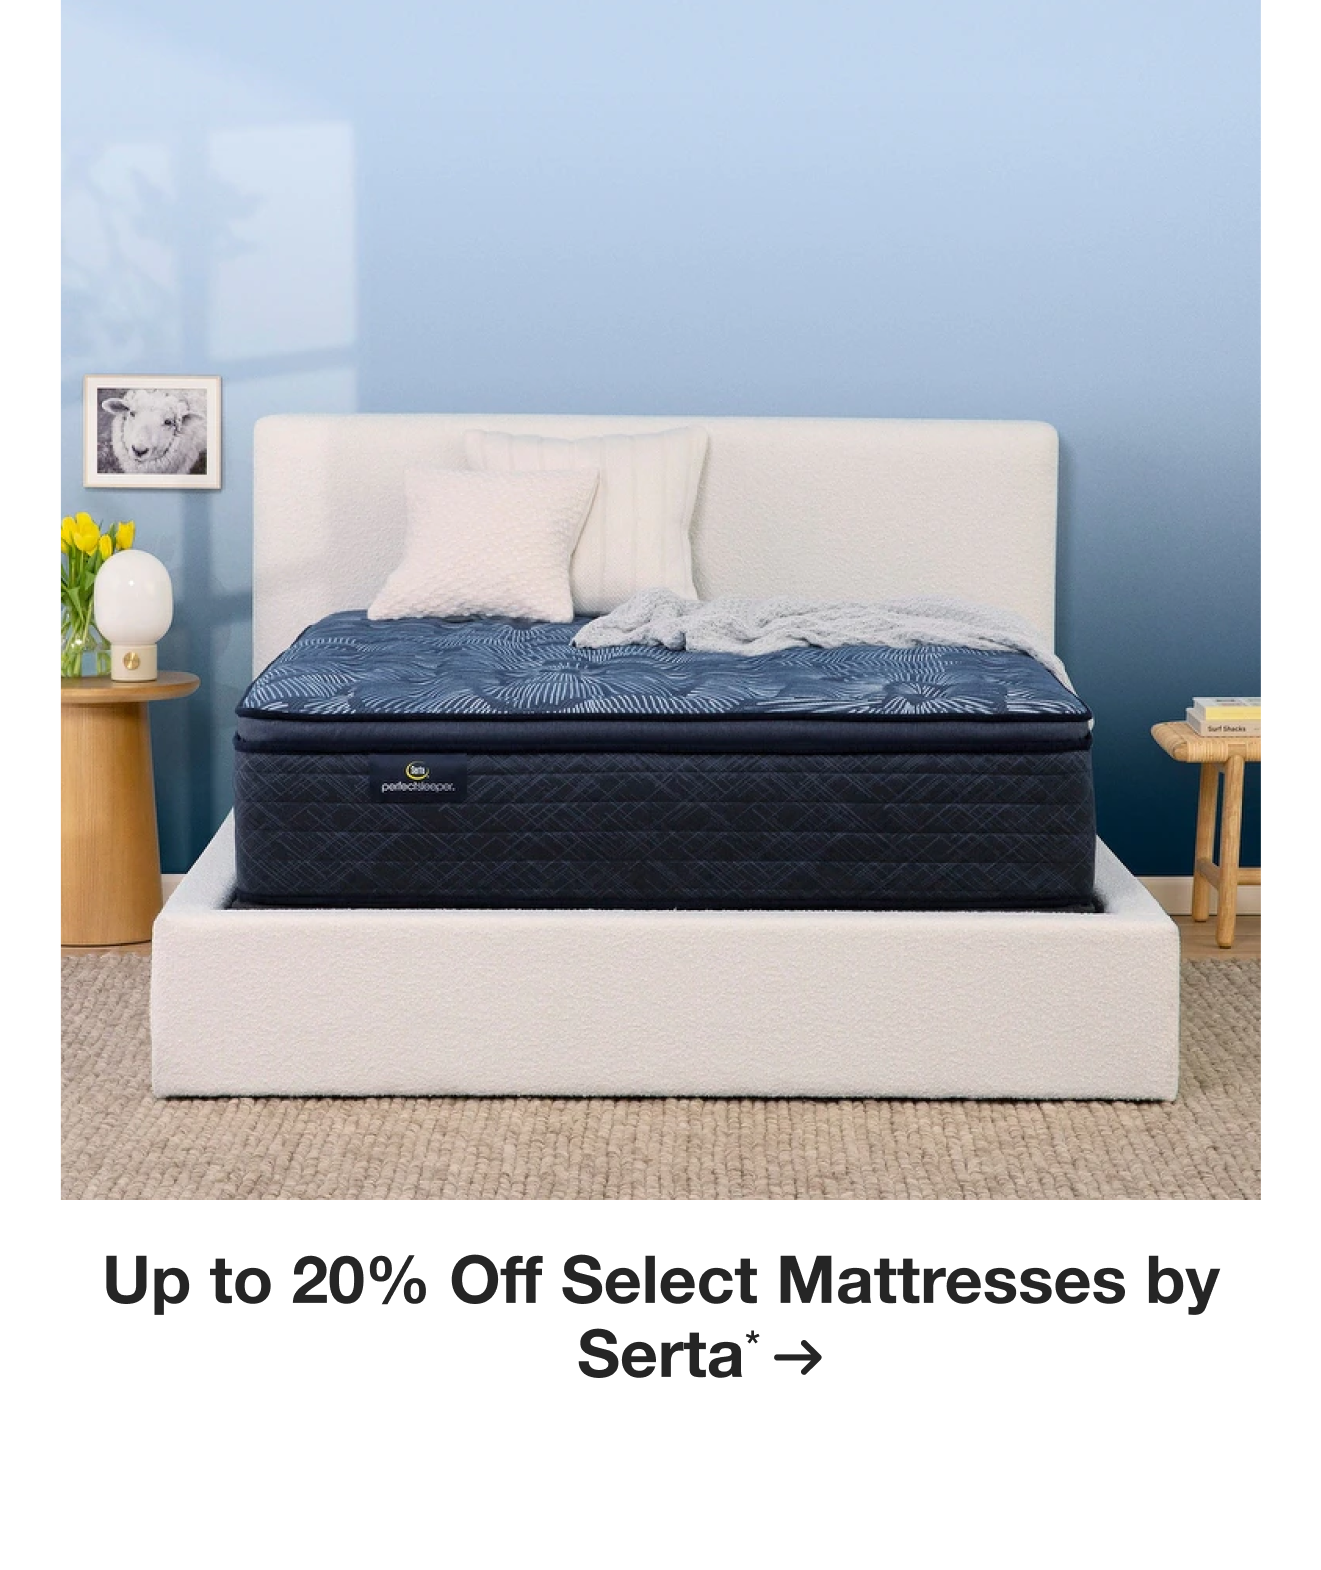 Up to 20% Off Select Mattresses by Serta*